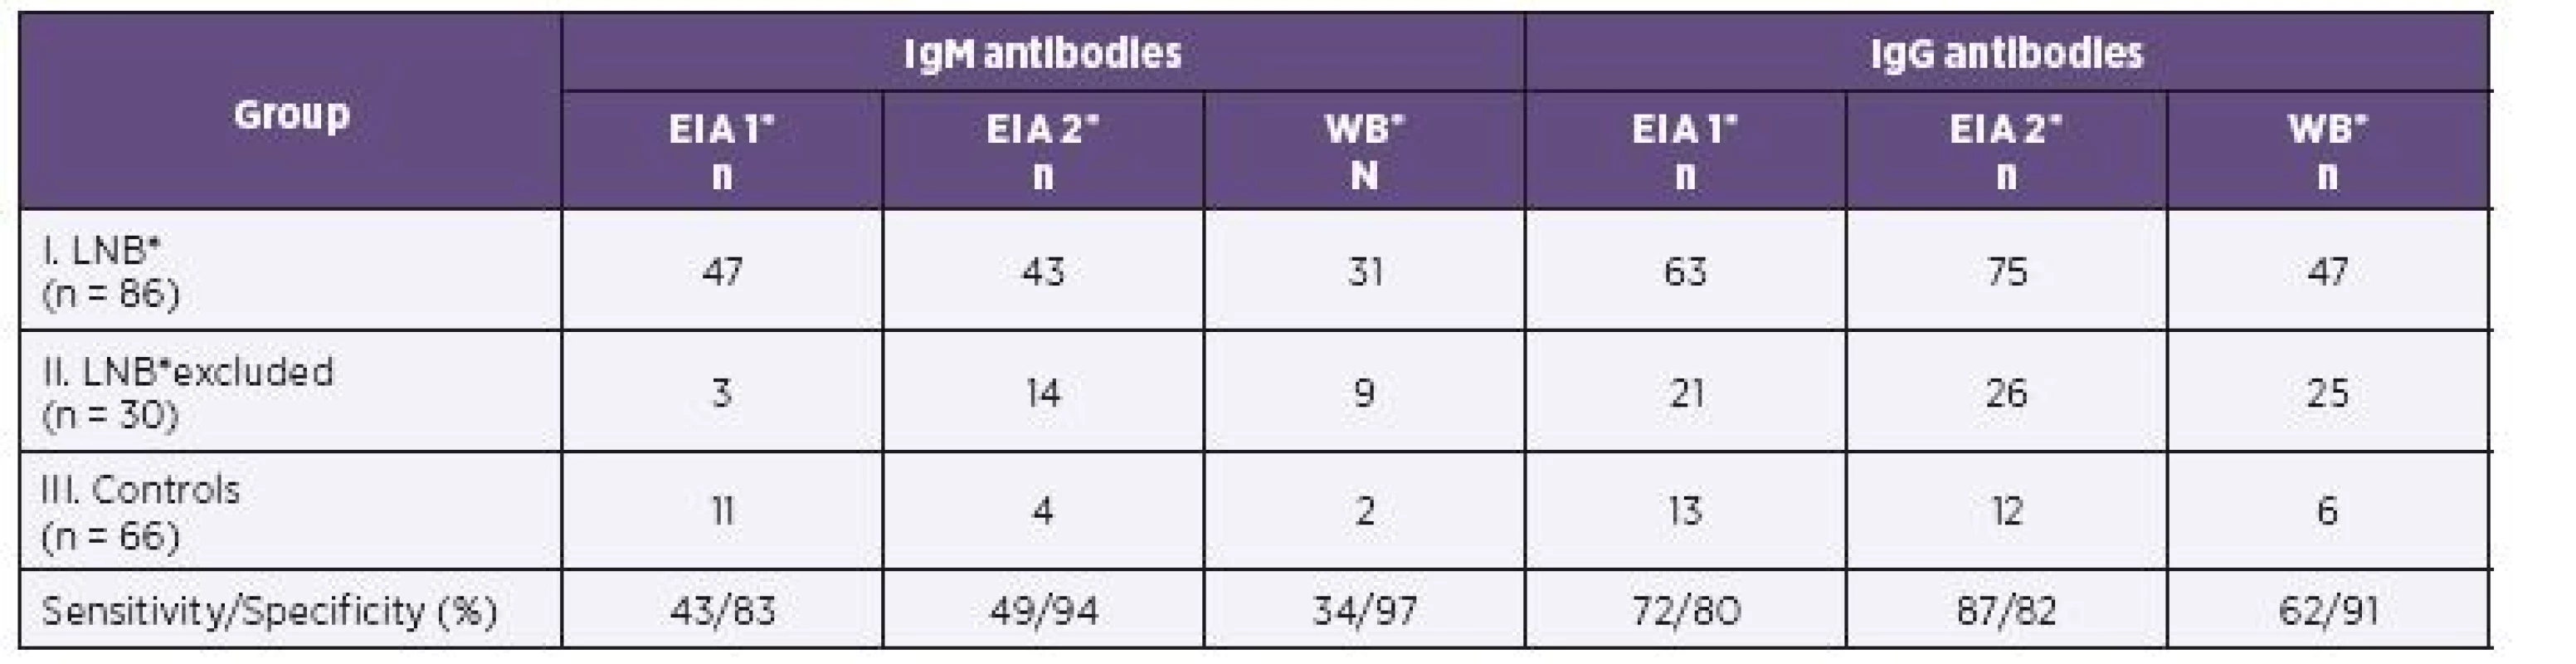 Serum Samples of 182 Children: Comparison of Positive Antibody Response by Two EIA Tests and Western Blot